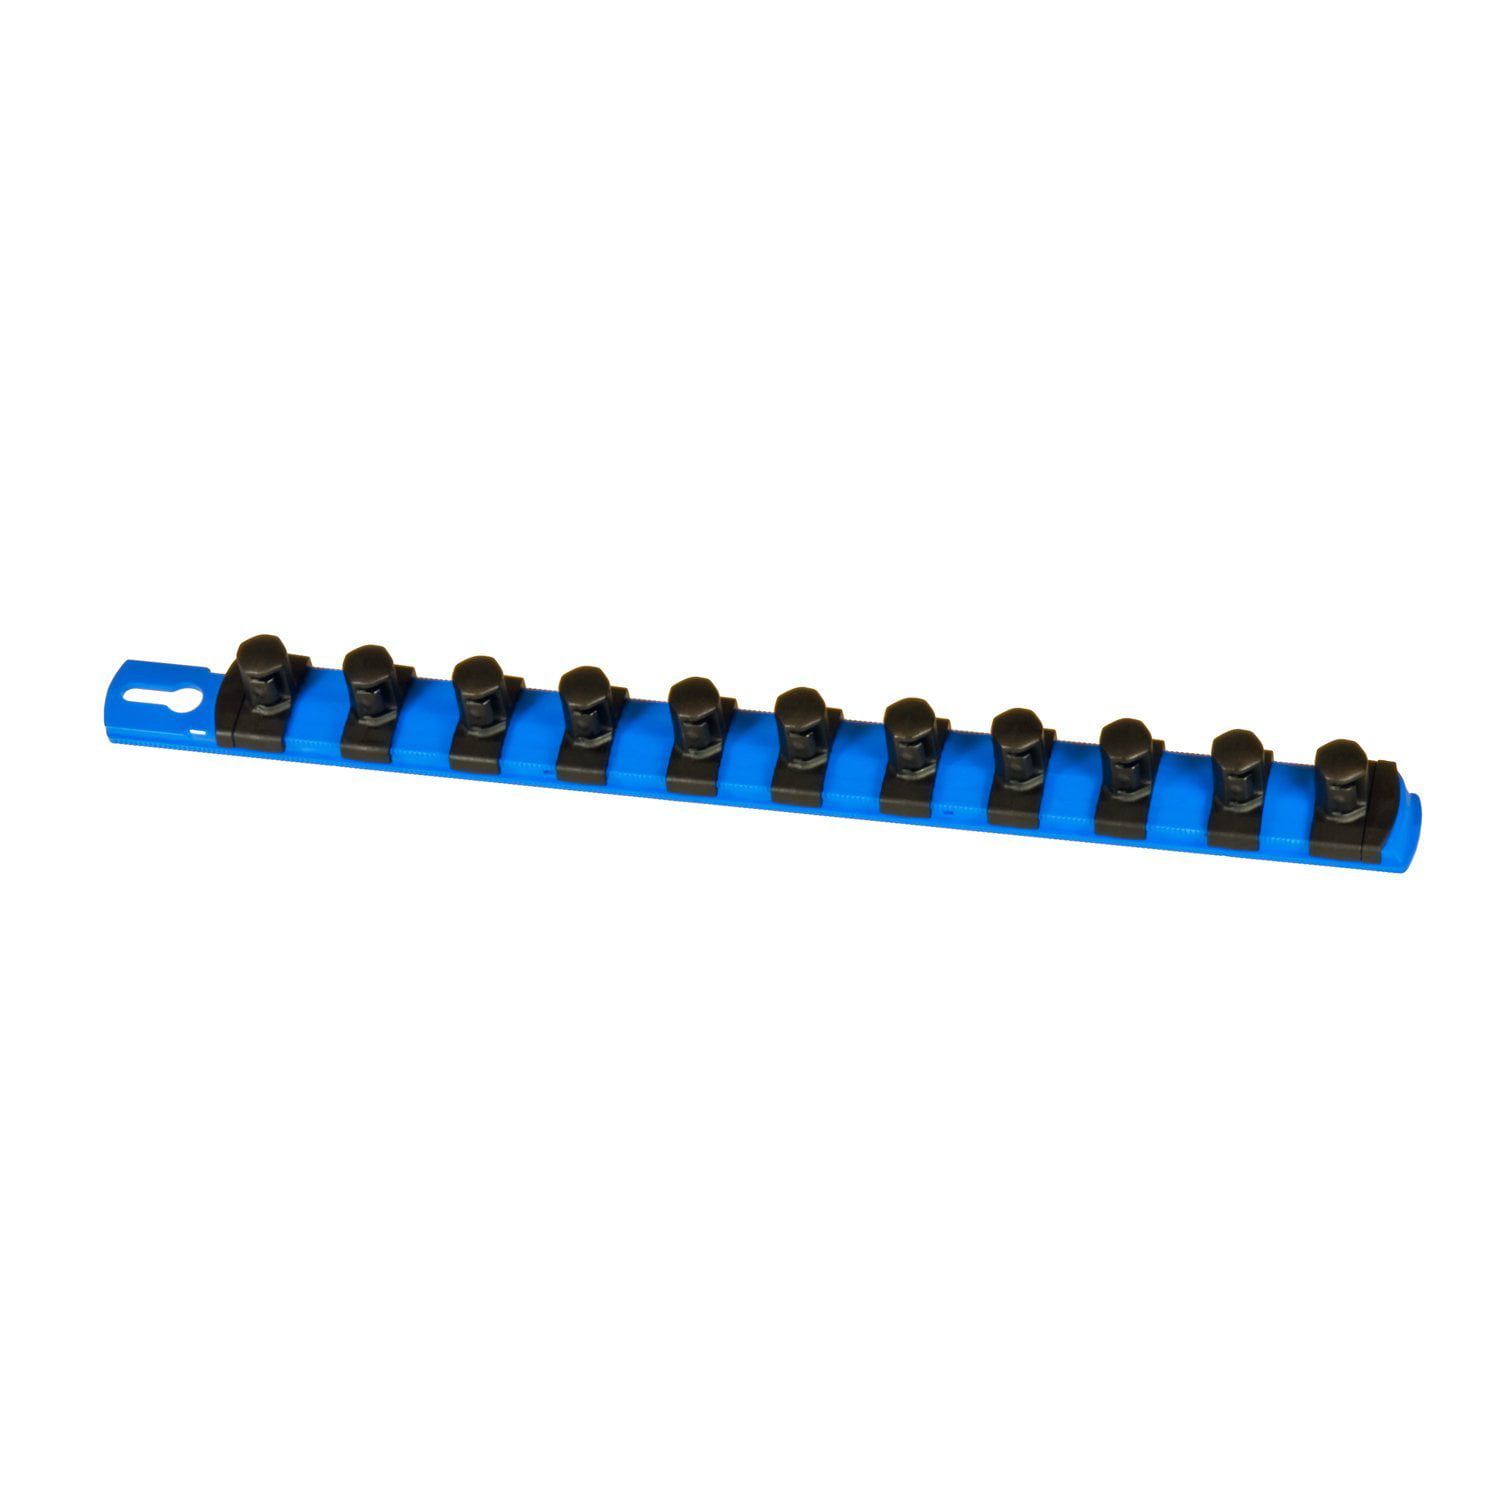 Ernst Manufacturing 8-Inch Magnetic Socket Organizer with 9 3/8-Inch Twist Lock Clips Blue 